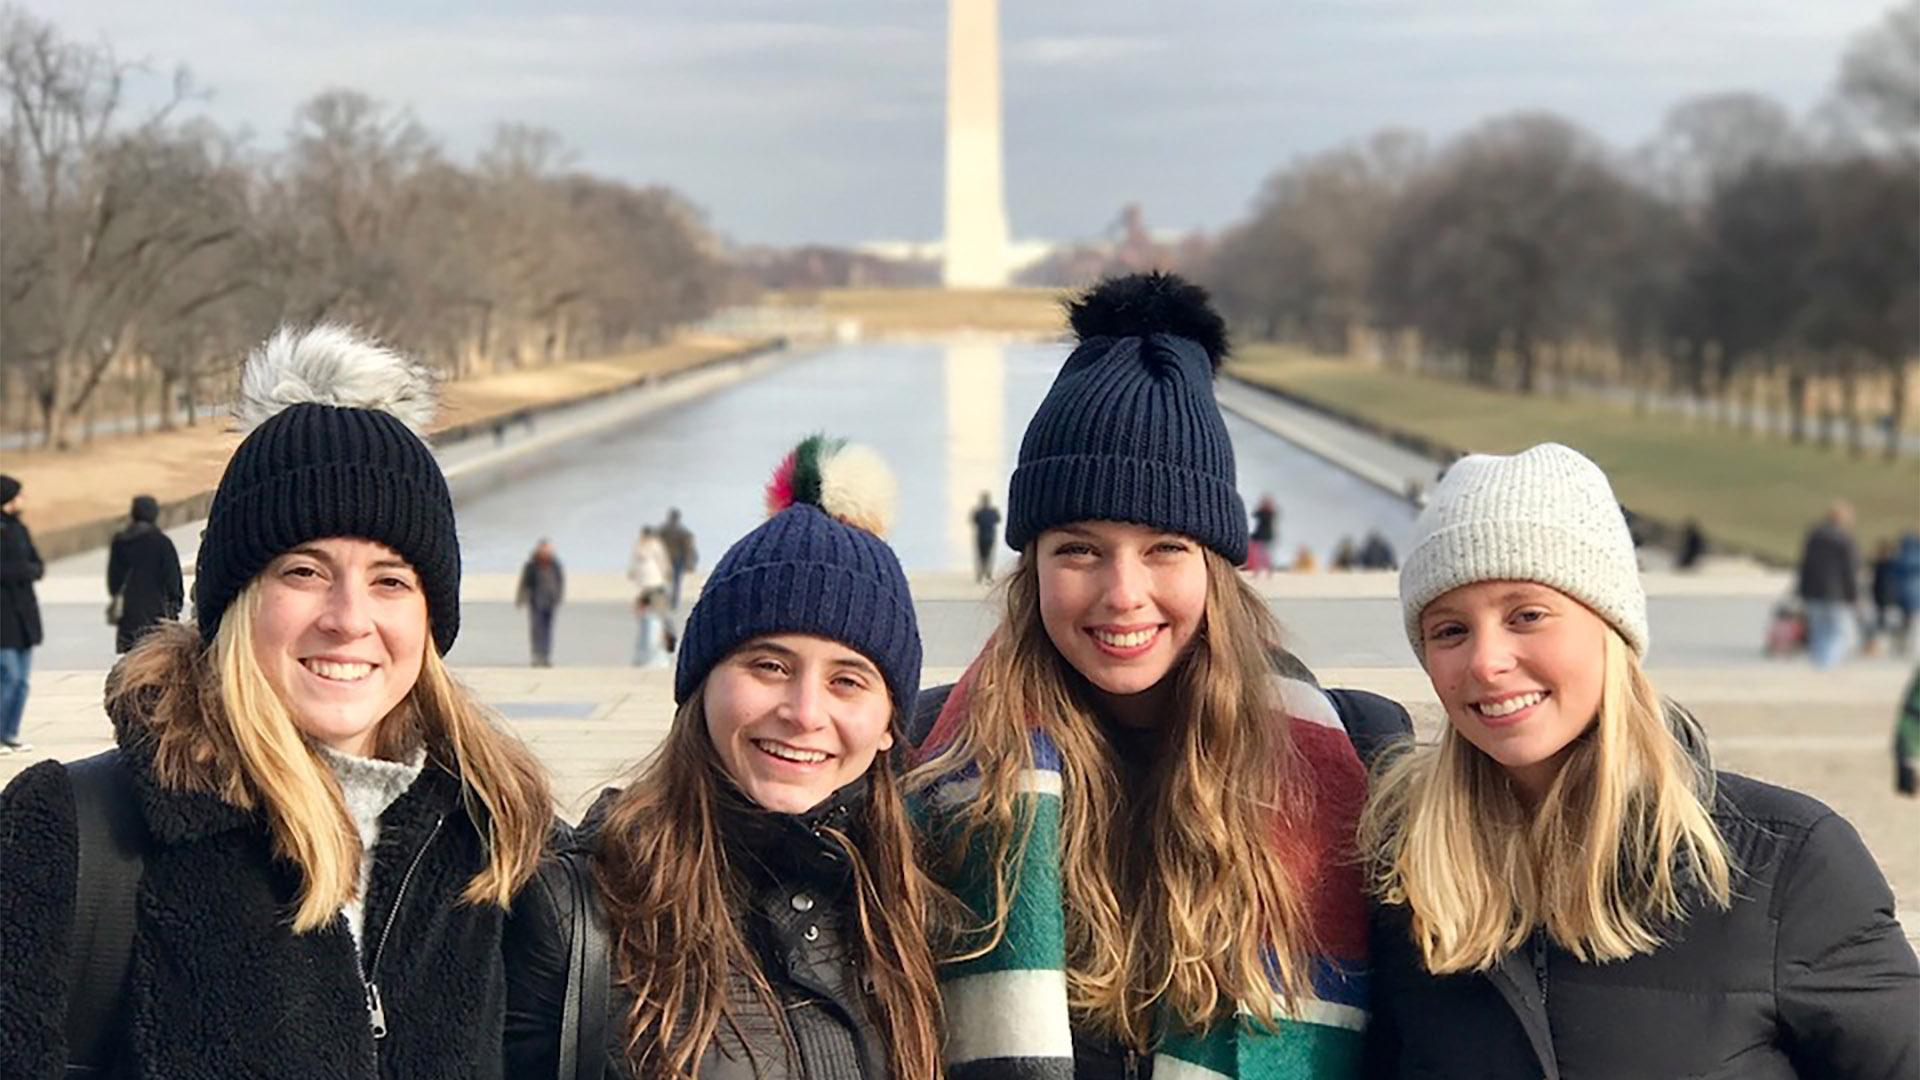 Four students with the Washington monument and reflecting pool in the background